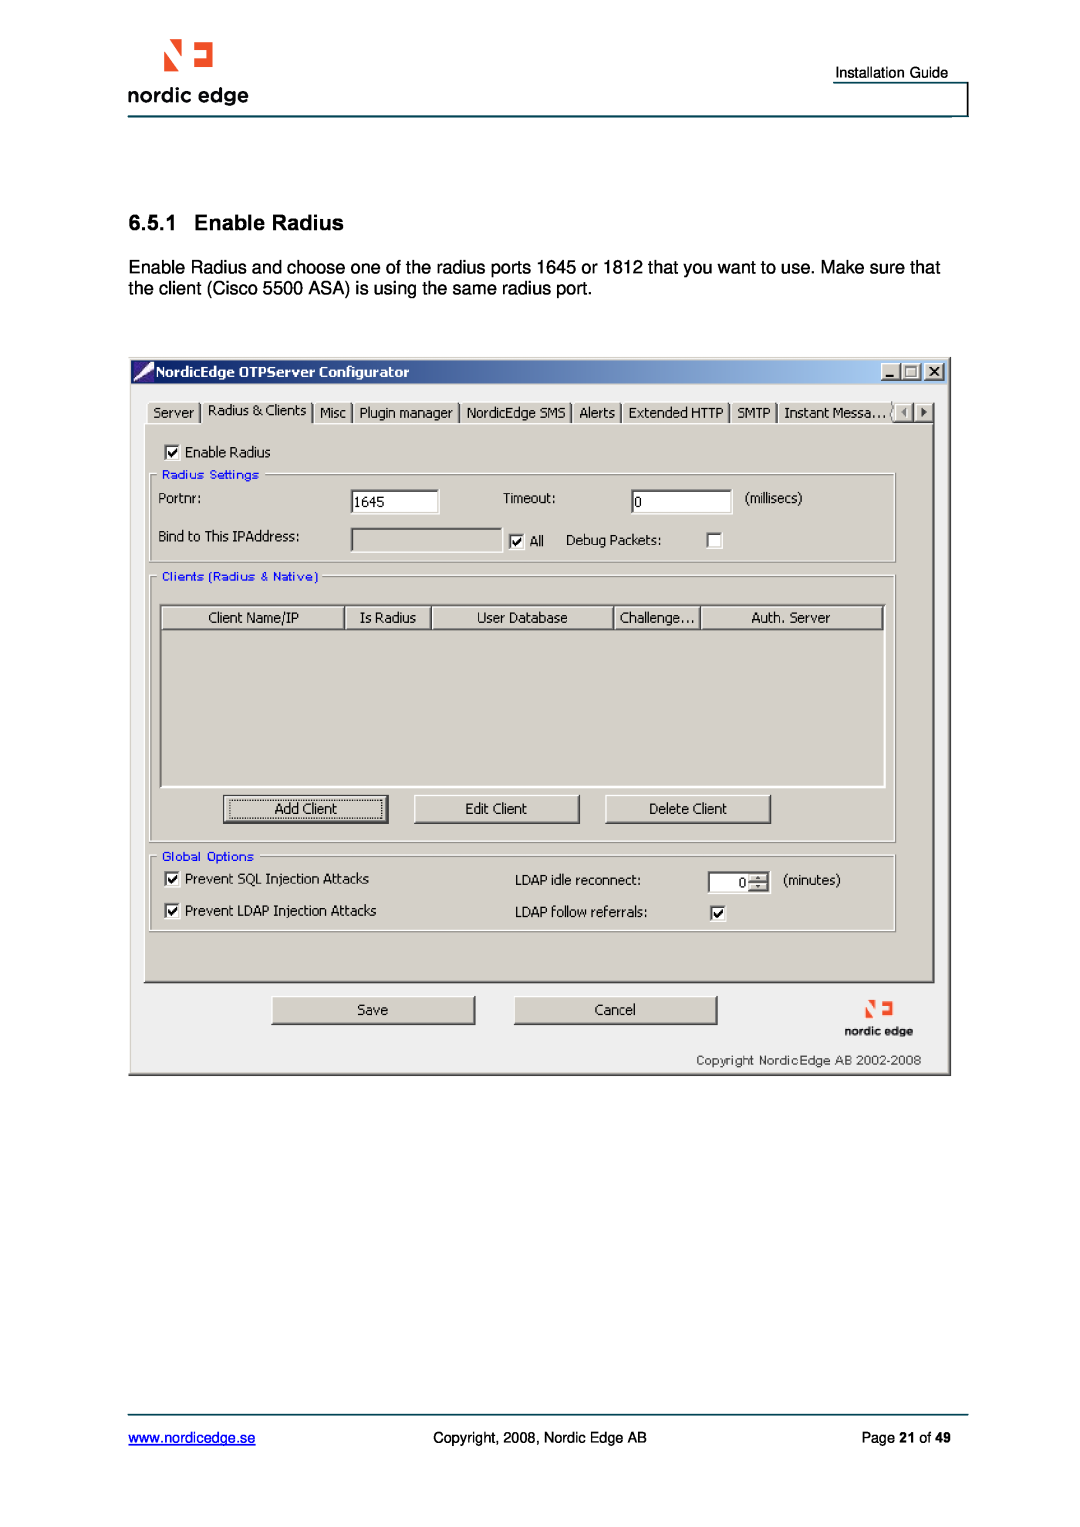 Cisco Systems ASA 5500 manual Enable Radius, Installation Guide, Copyright, 2008, Nordic Edge AB, Page 21 of 